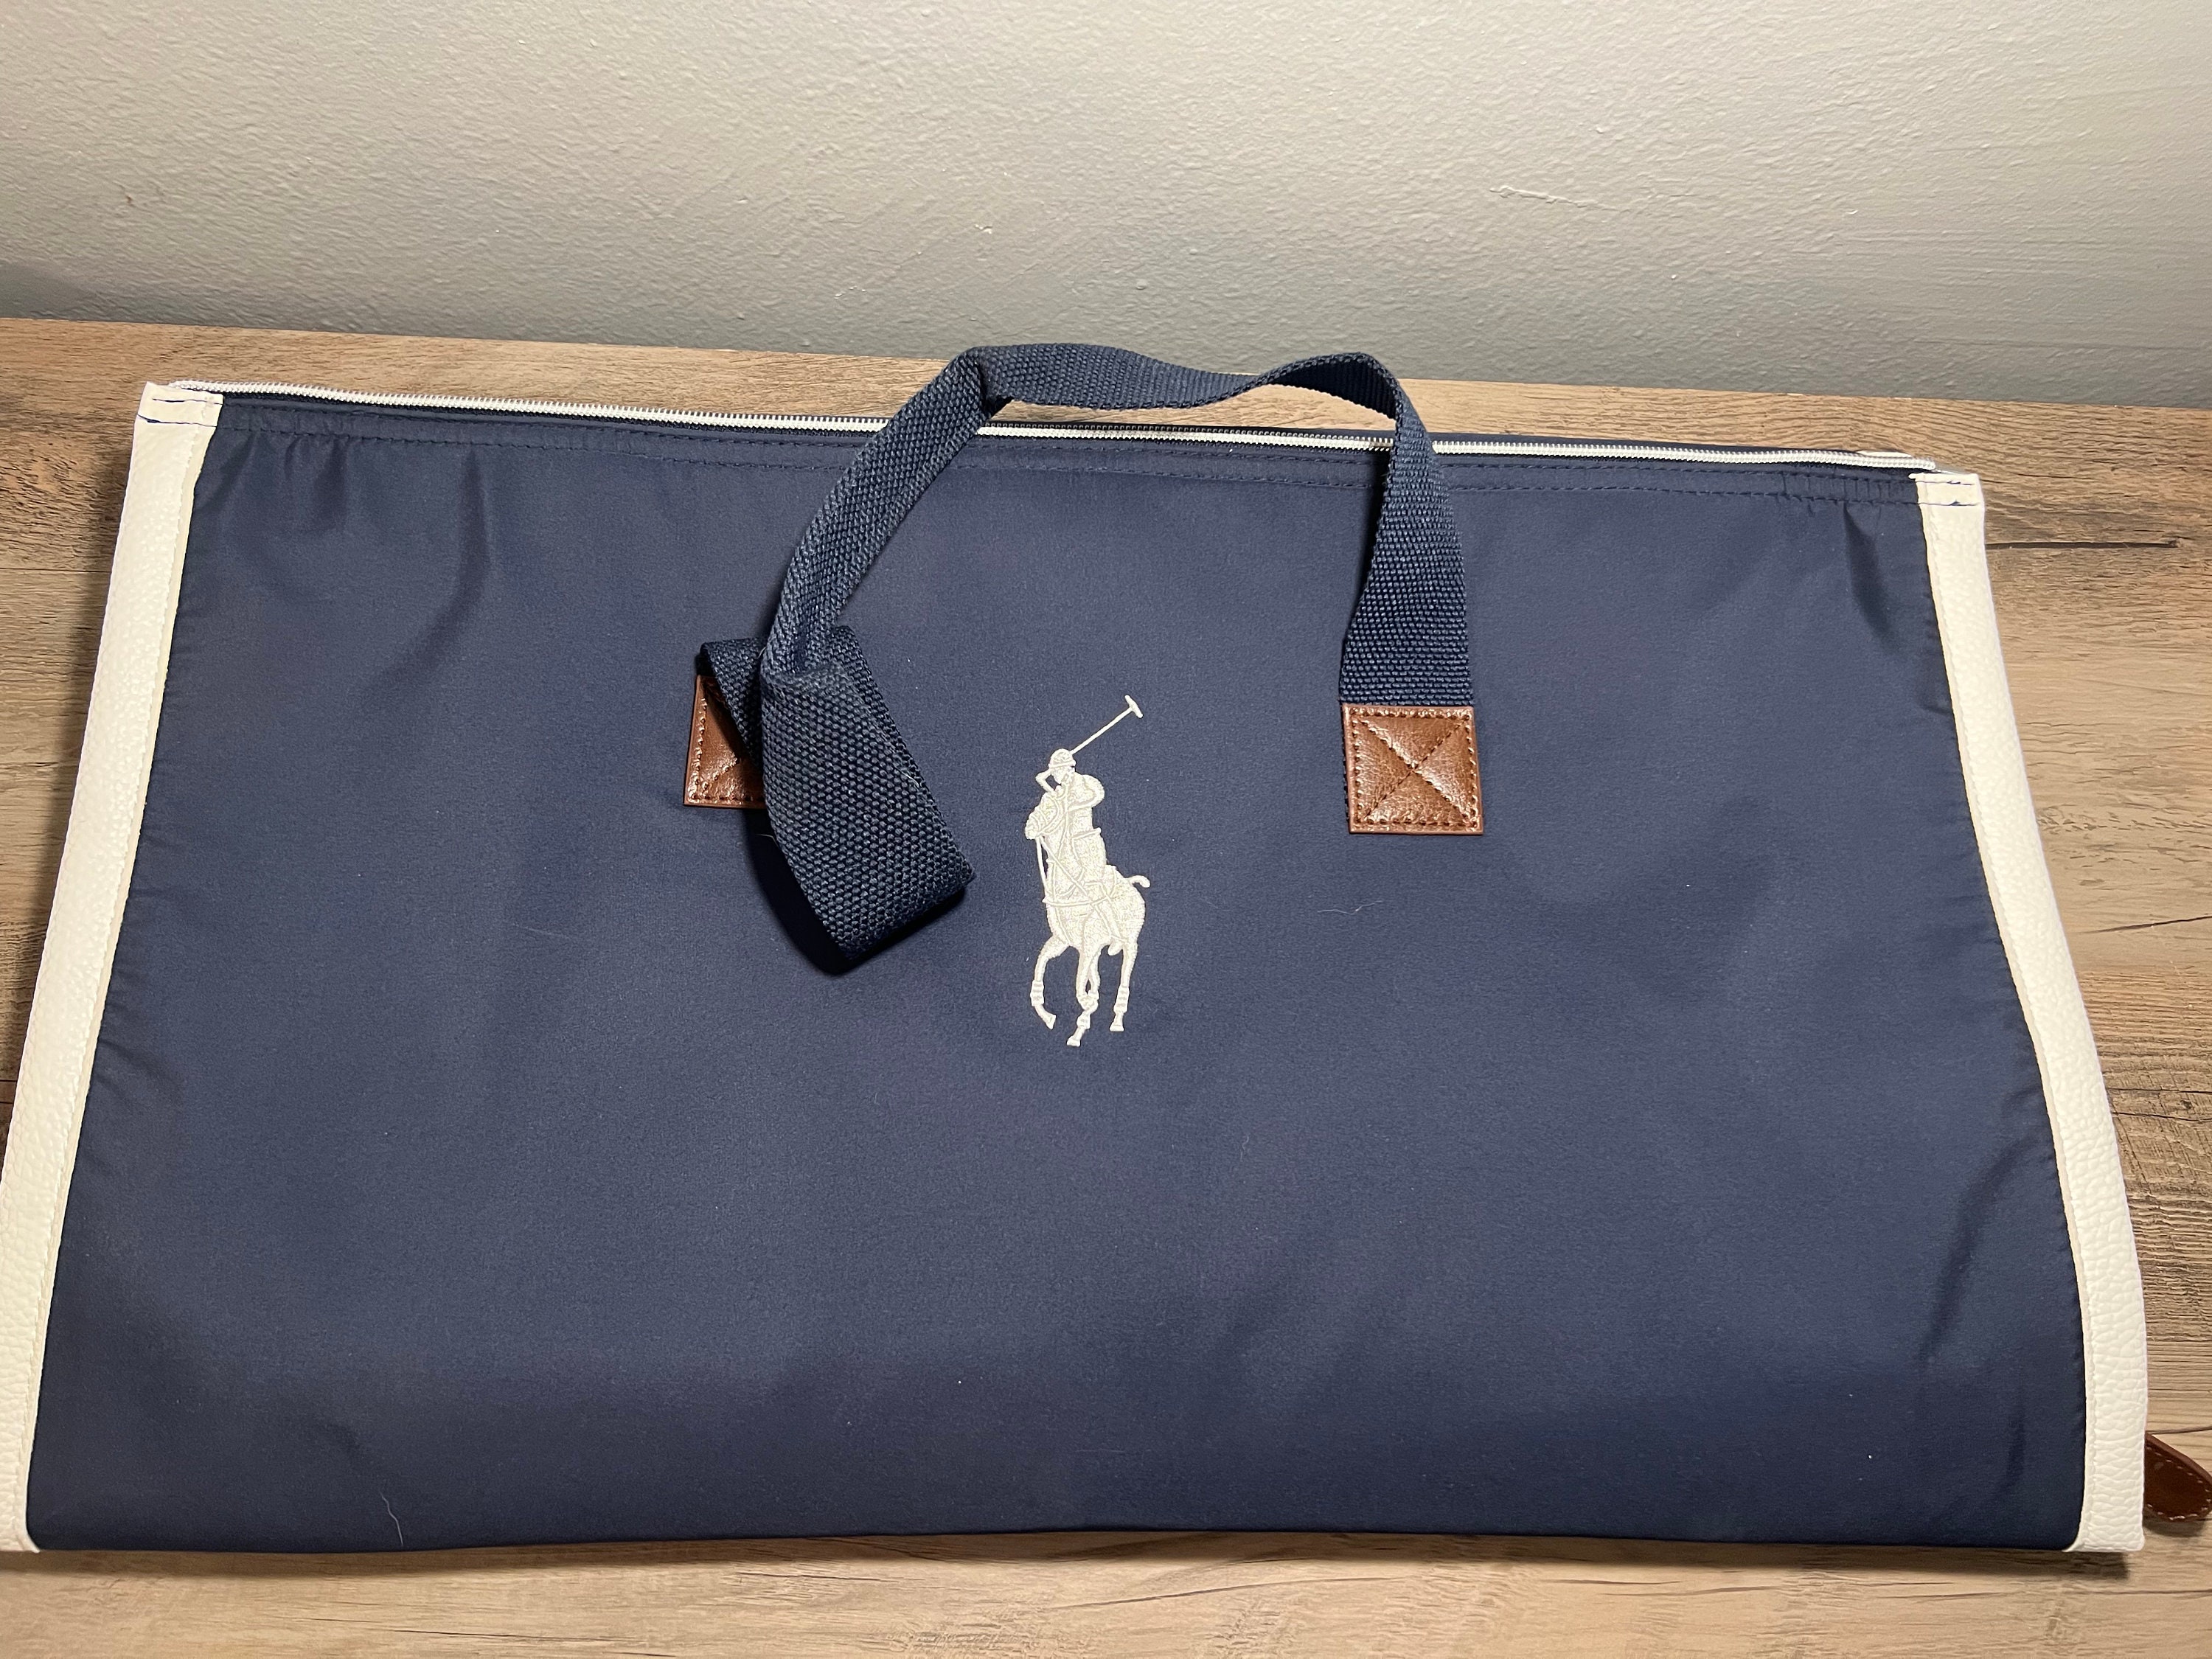 POLO Ralph Lauren DUFFLE Gym CARRY-ON Weekender TRAVEL Bag NAVY BLUE NWT